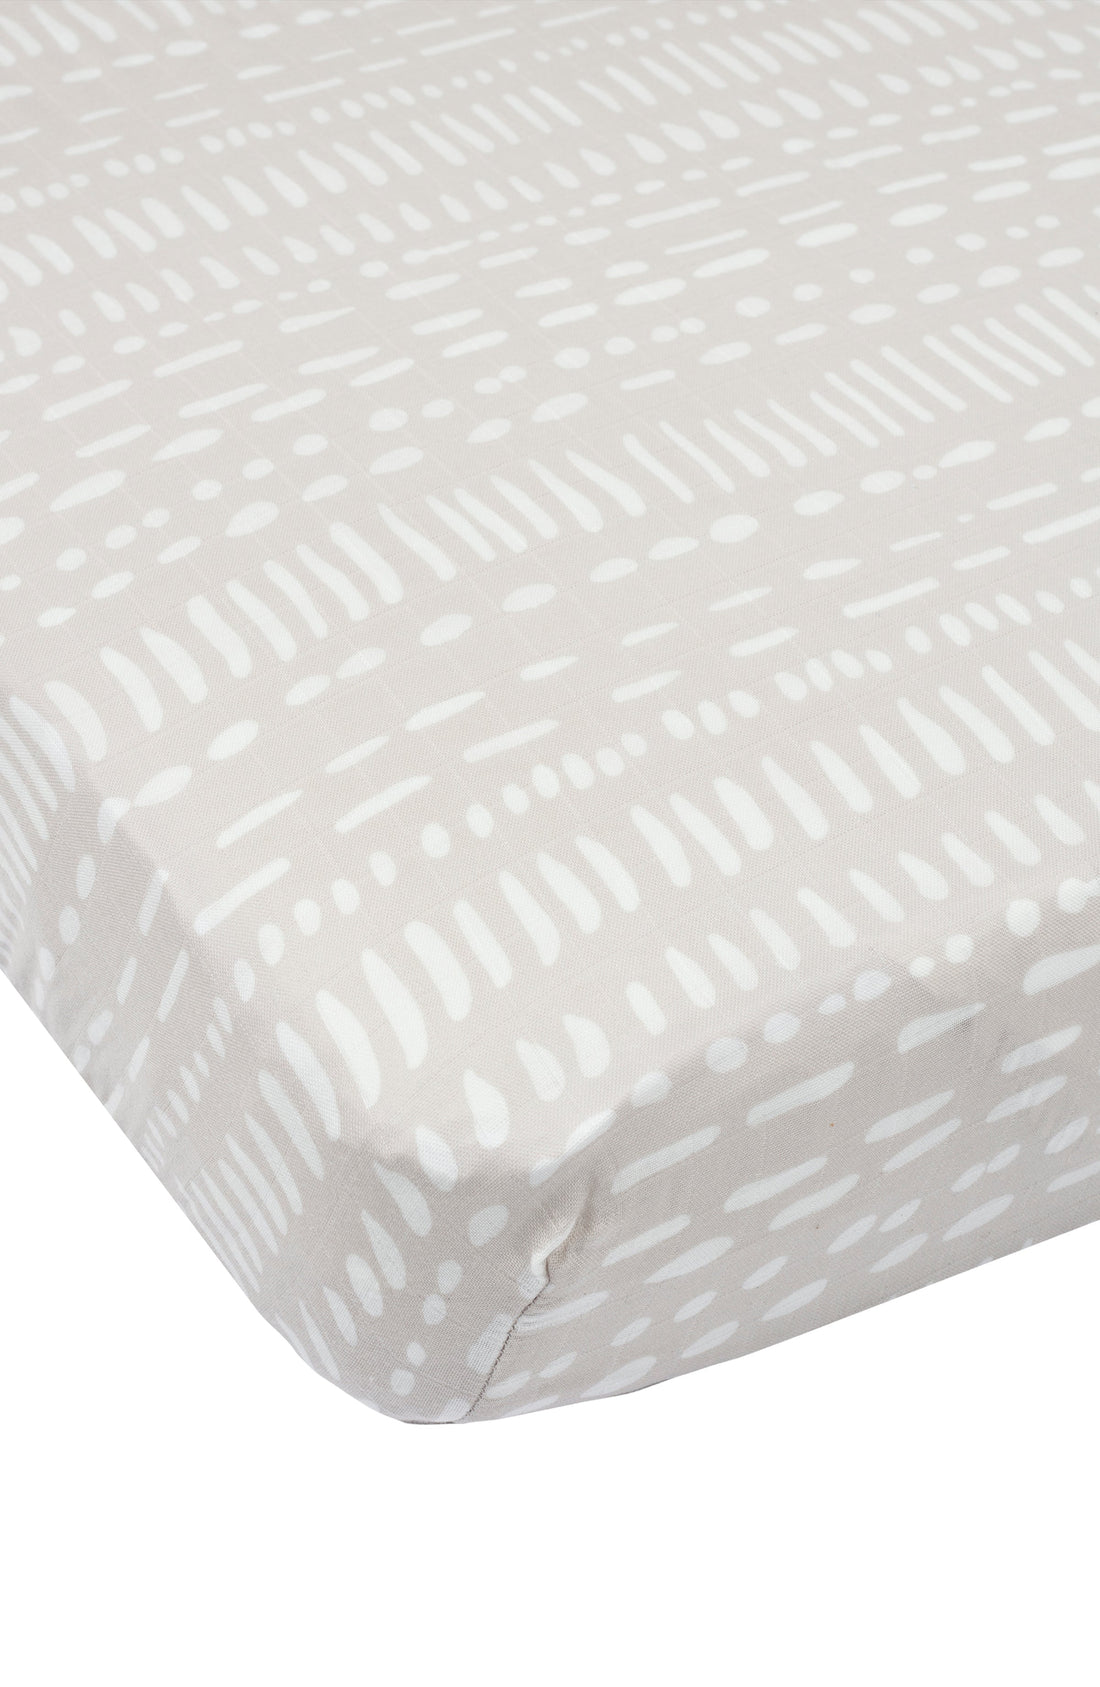 Fitted Crib Sheet Sleep & Swaddle Loulou Lollipop 